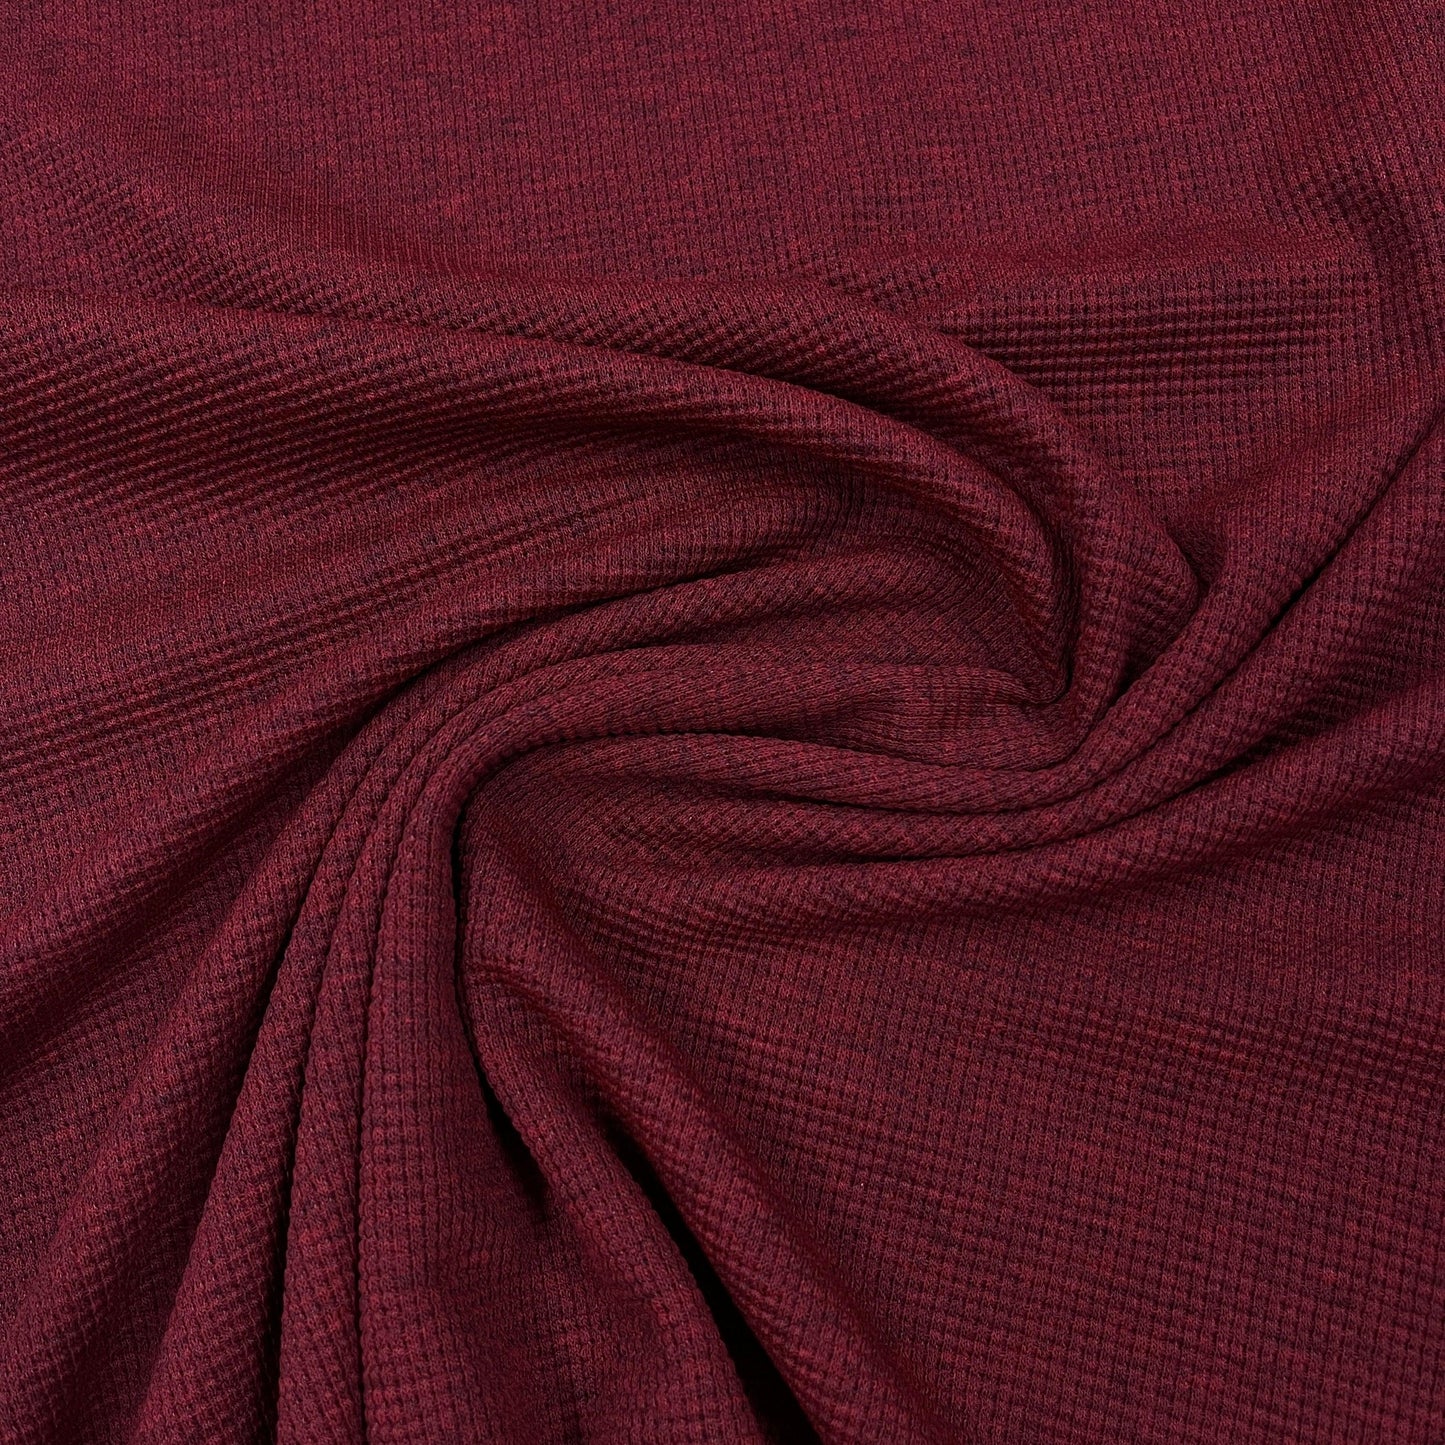 Red Pepper Rayon/Spandex Thermal Fabric - Nature's Fabrics